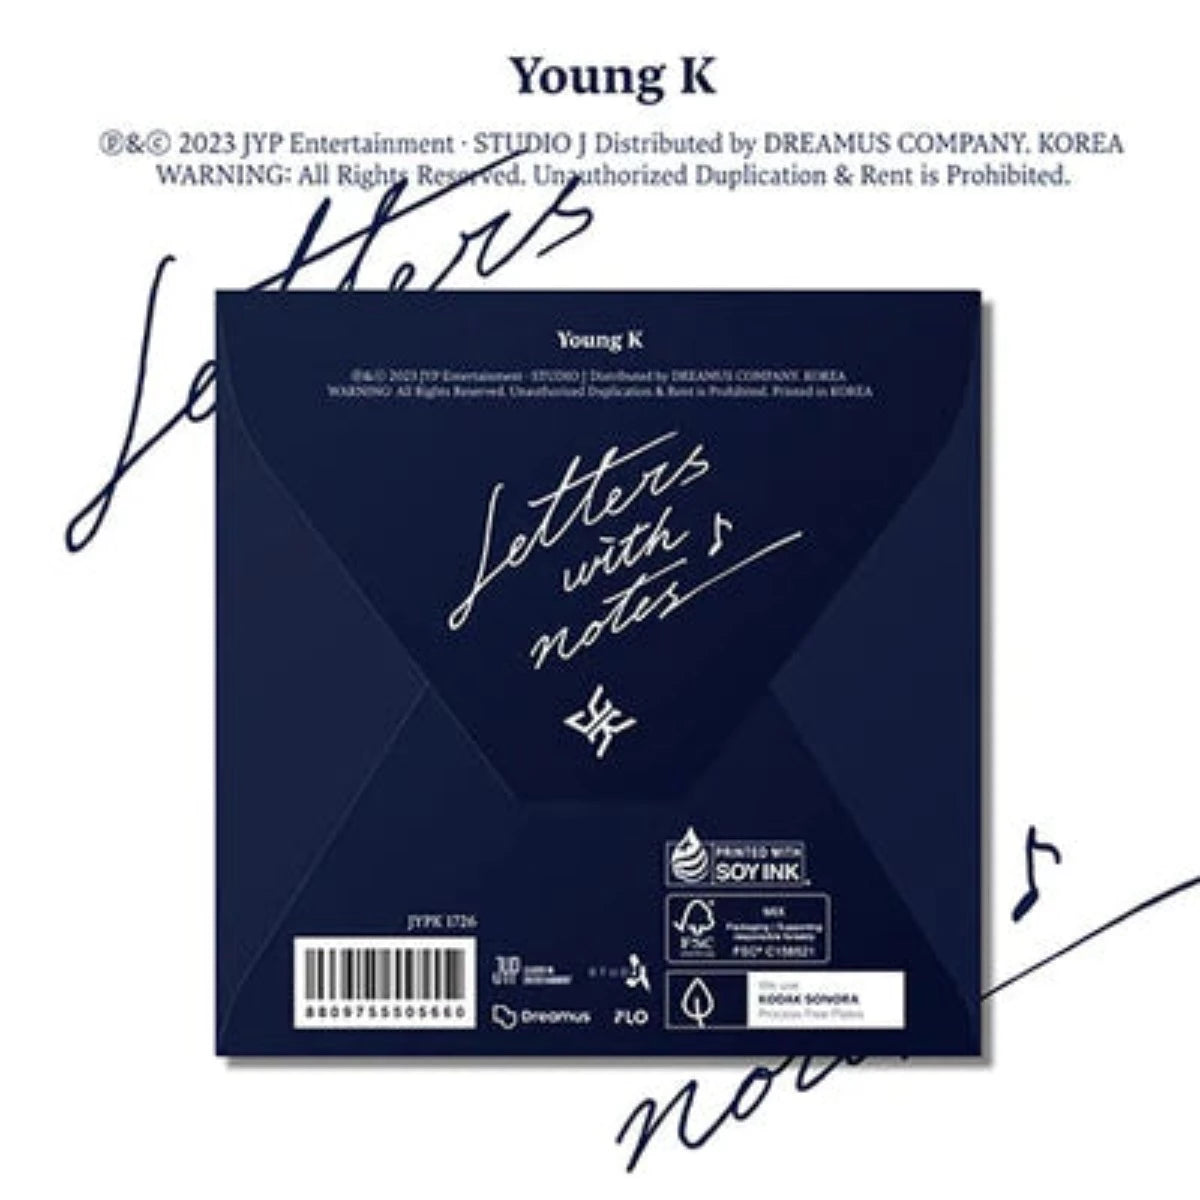 DAY6: Young K Vol. 1 - Letters with notes (Digipack Version)